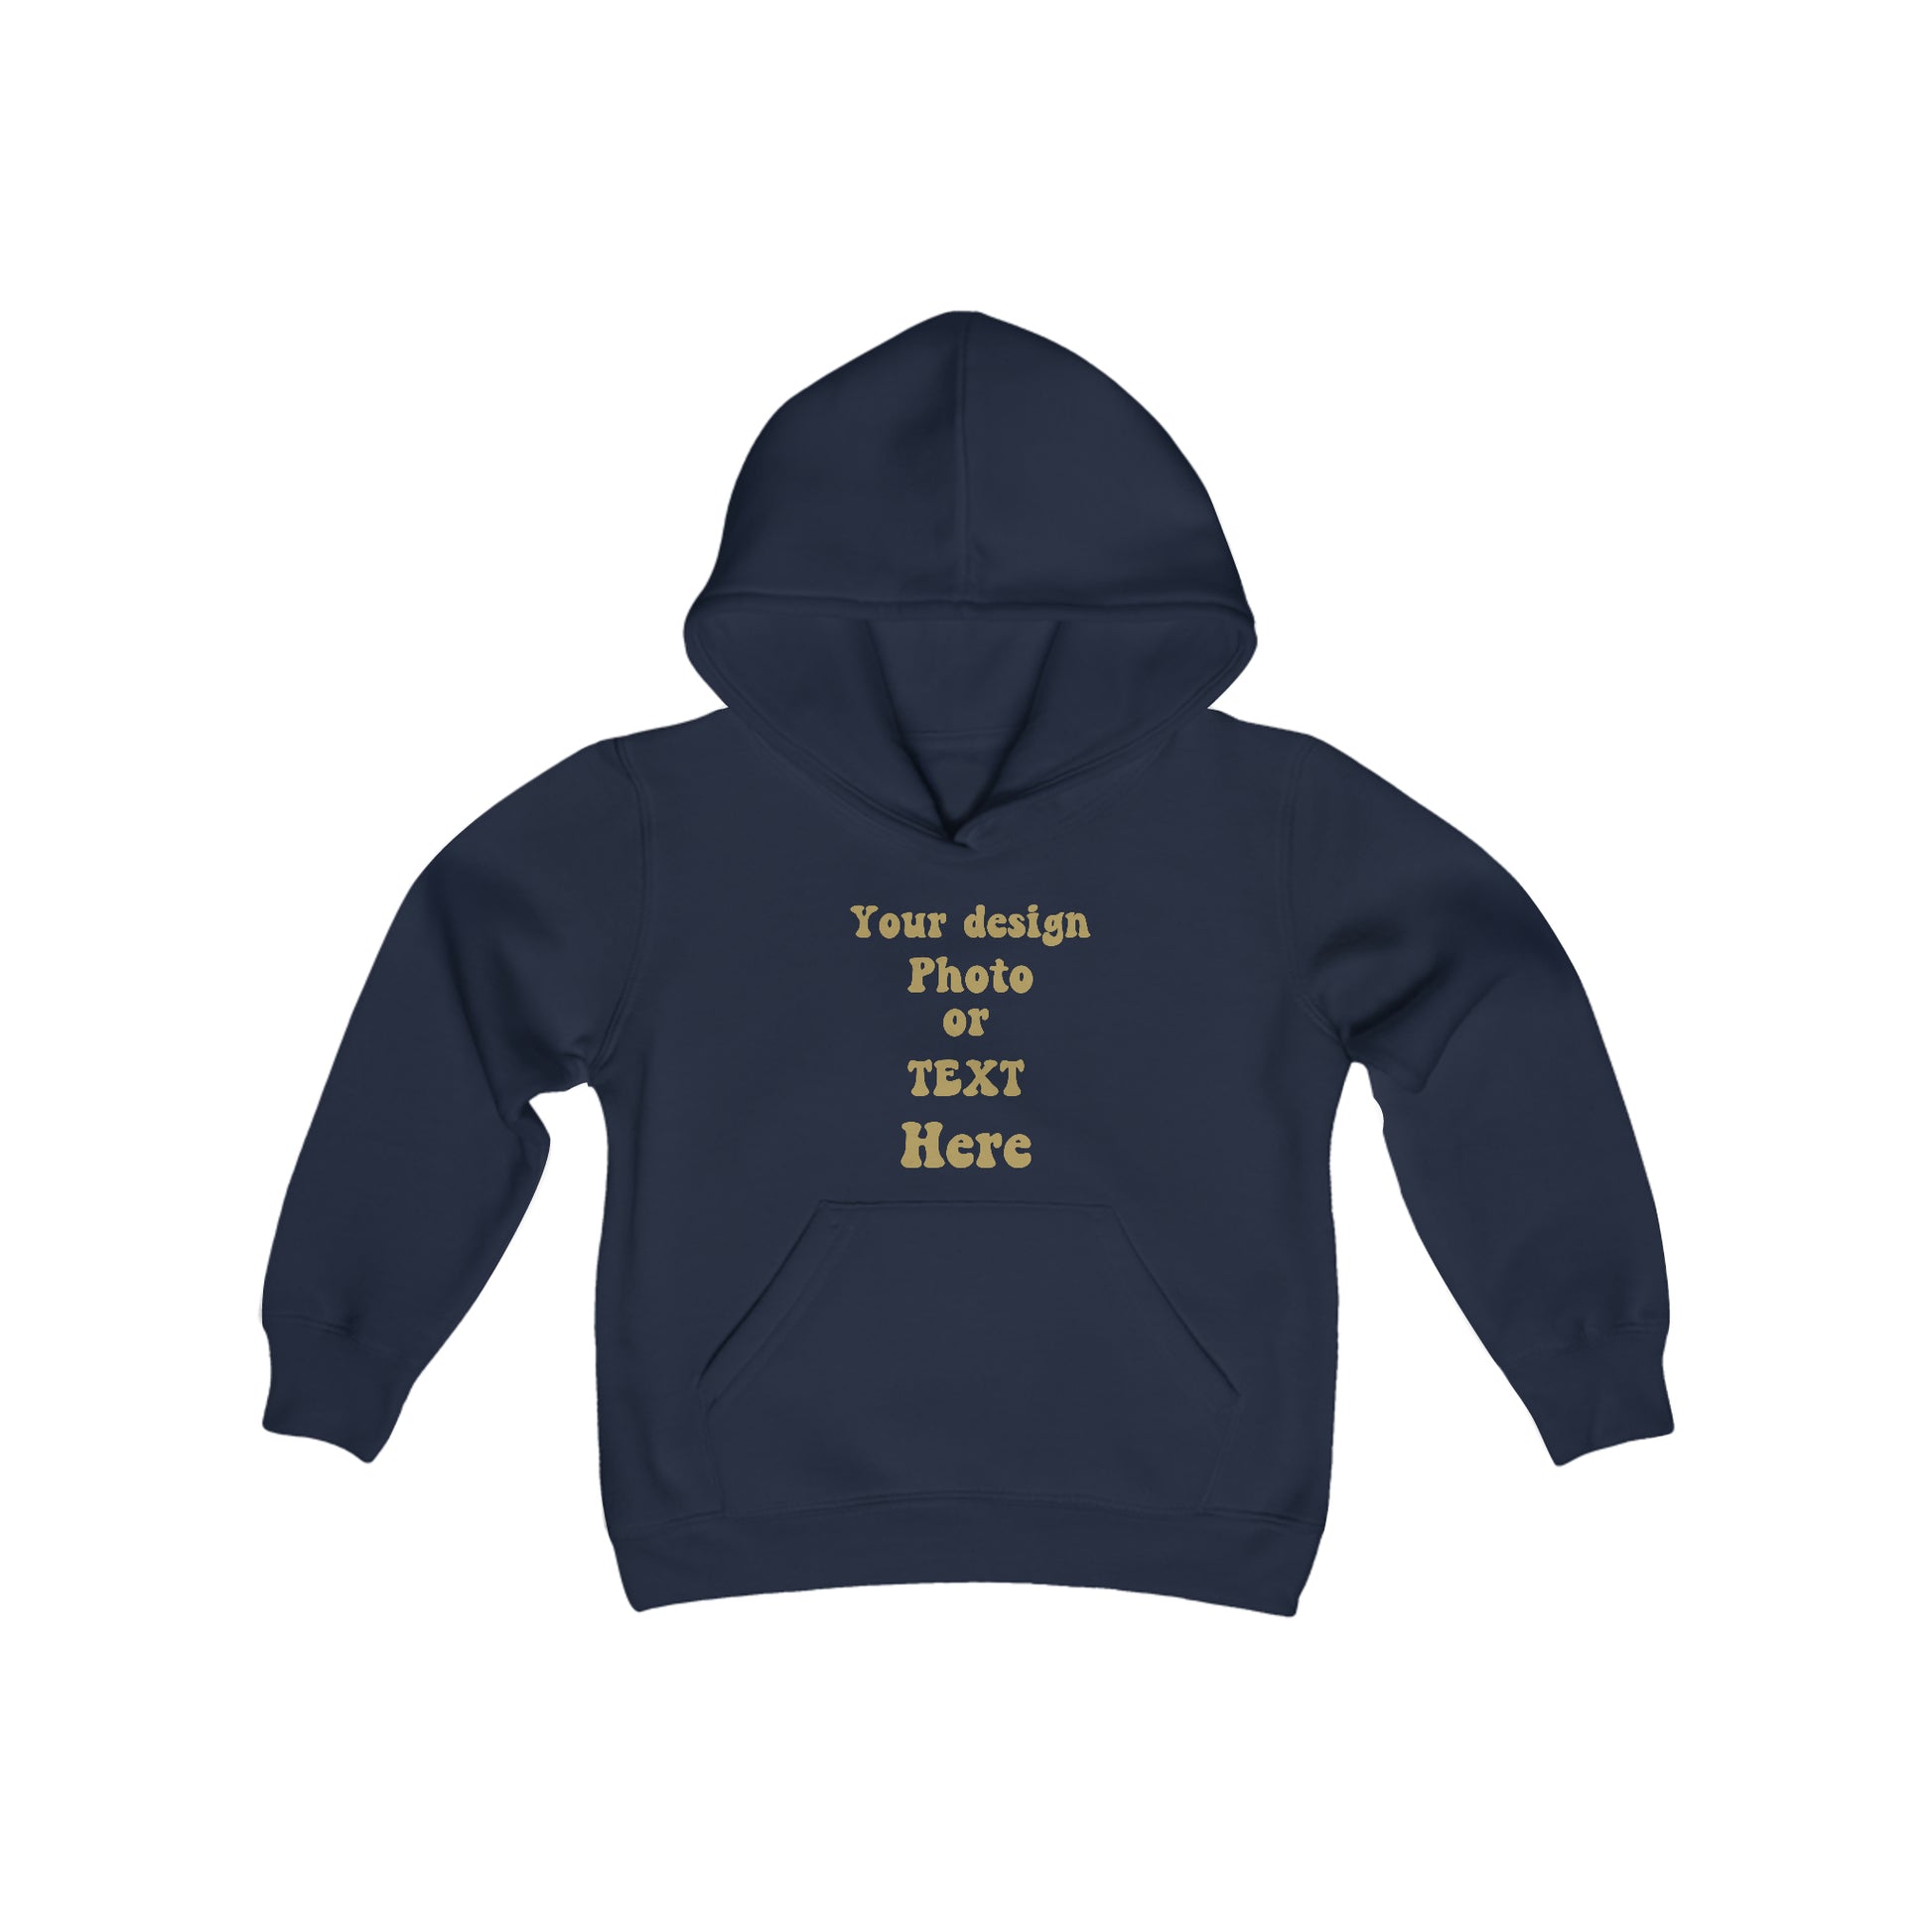 Youth Heavy Blend Hooded Sweatshirt - Personalize It with Text and Photo Kids clothes Navy S 